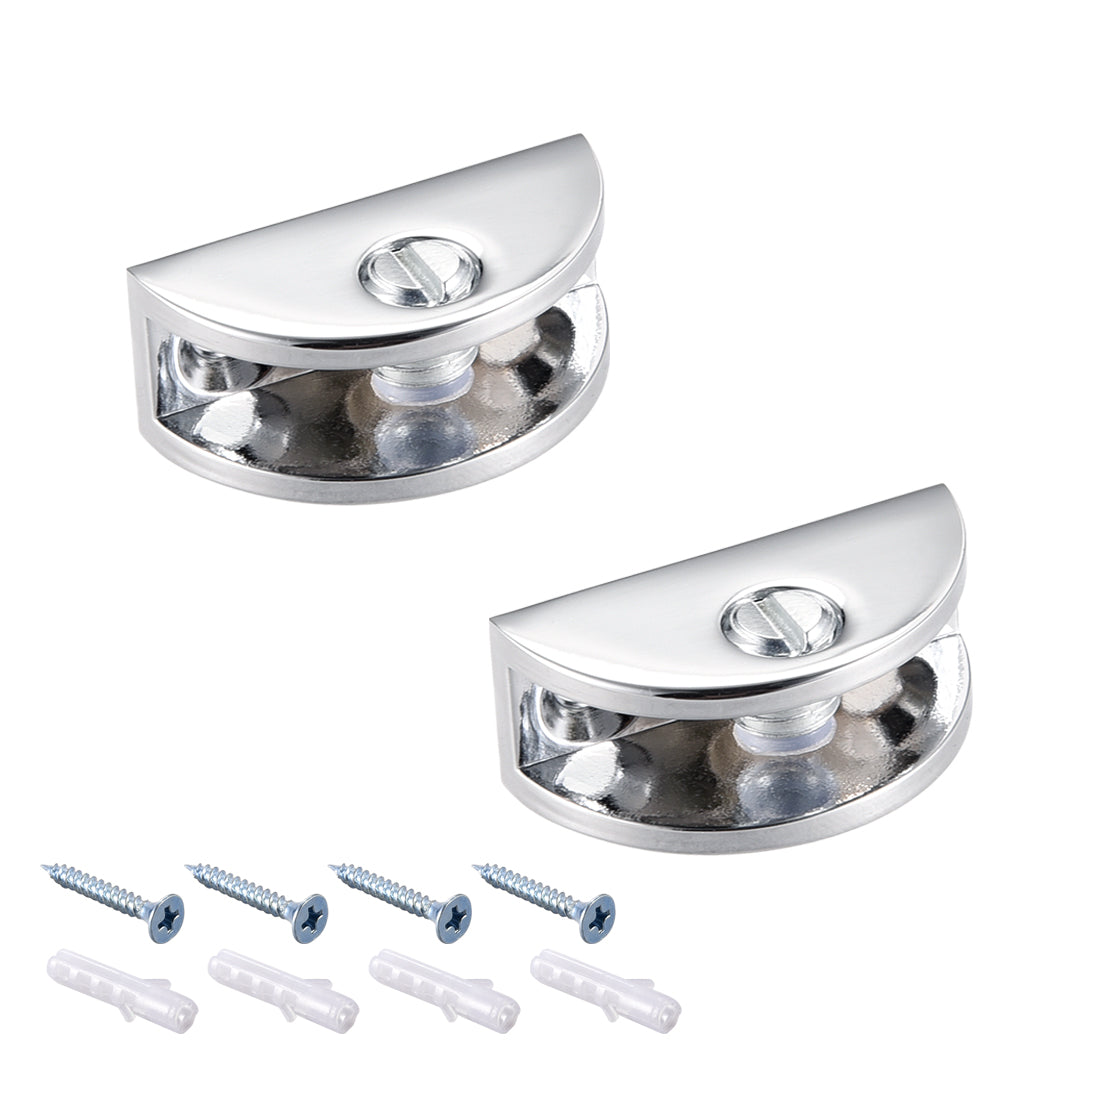 uxcell Uxcell Glass Shelf Brackets Zinc Alloy Clip Half Round for 3-8mm Thickness 2pcs